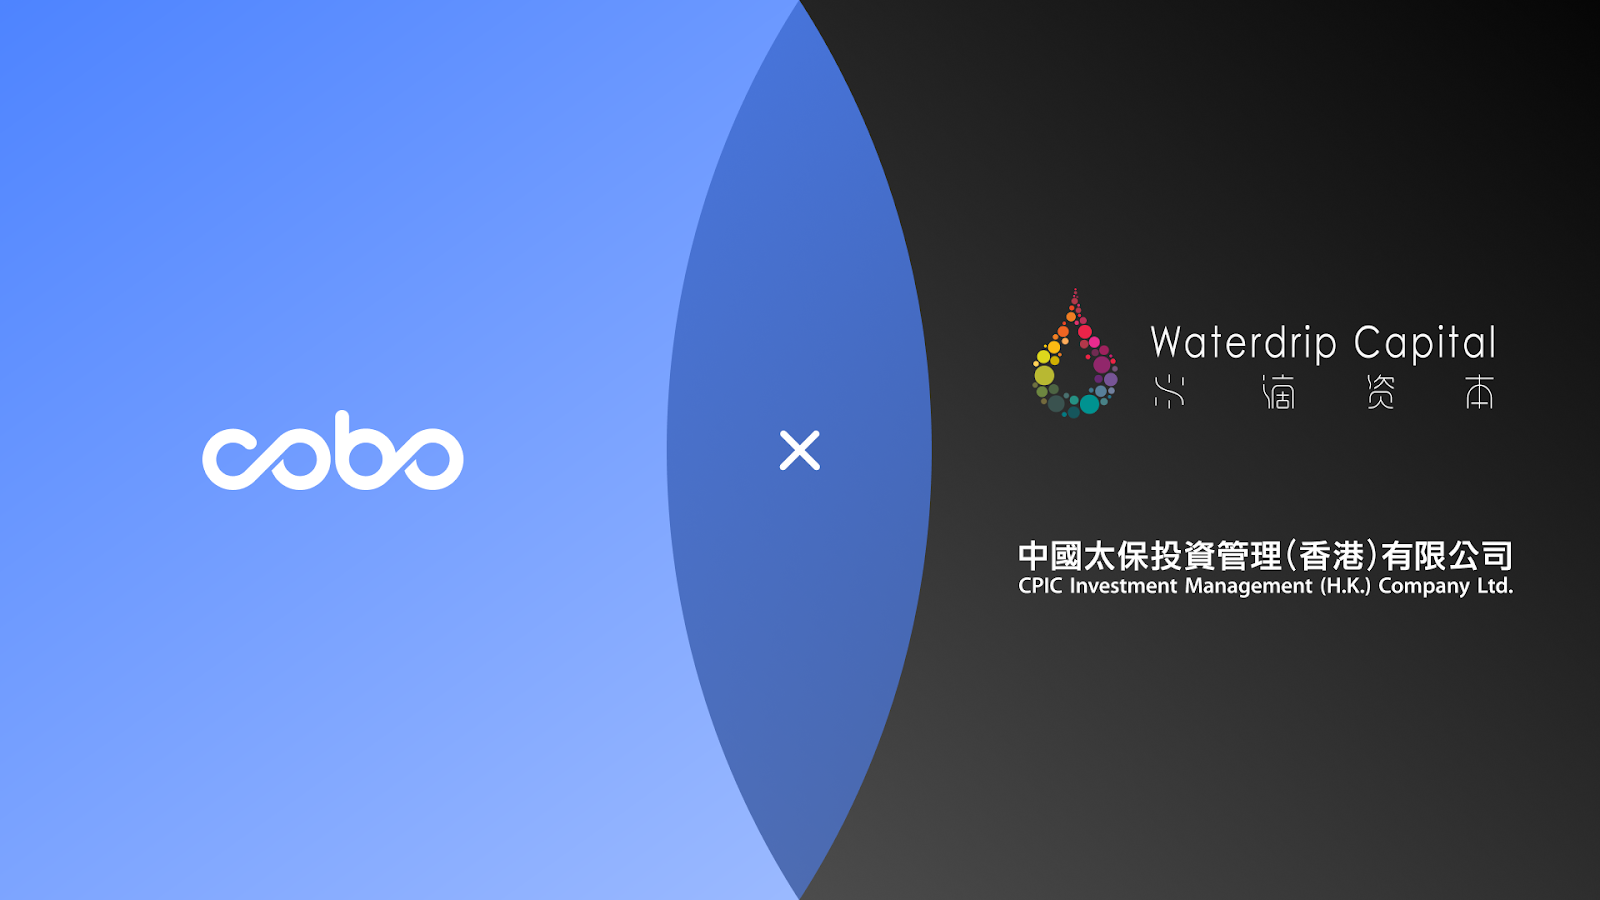 Leading Custody Provider, Cobo, Forges Strategic Partnership with Pacific Waterdrip Digital Asset Fund to Safeguard Digital Assets in Hong Kong